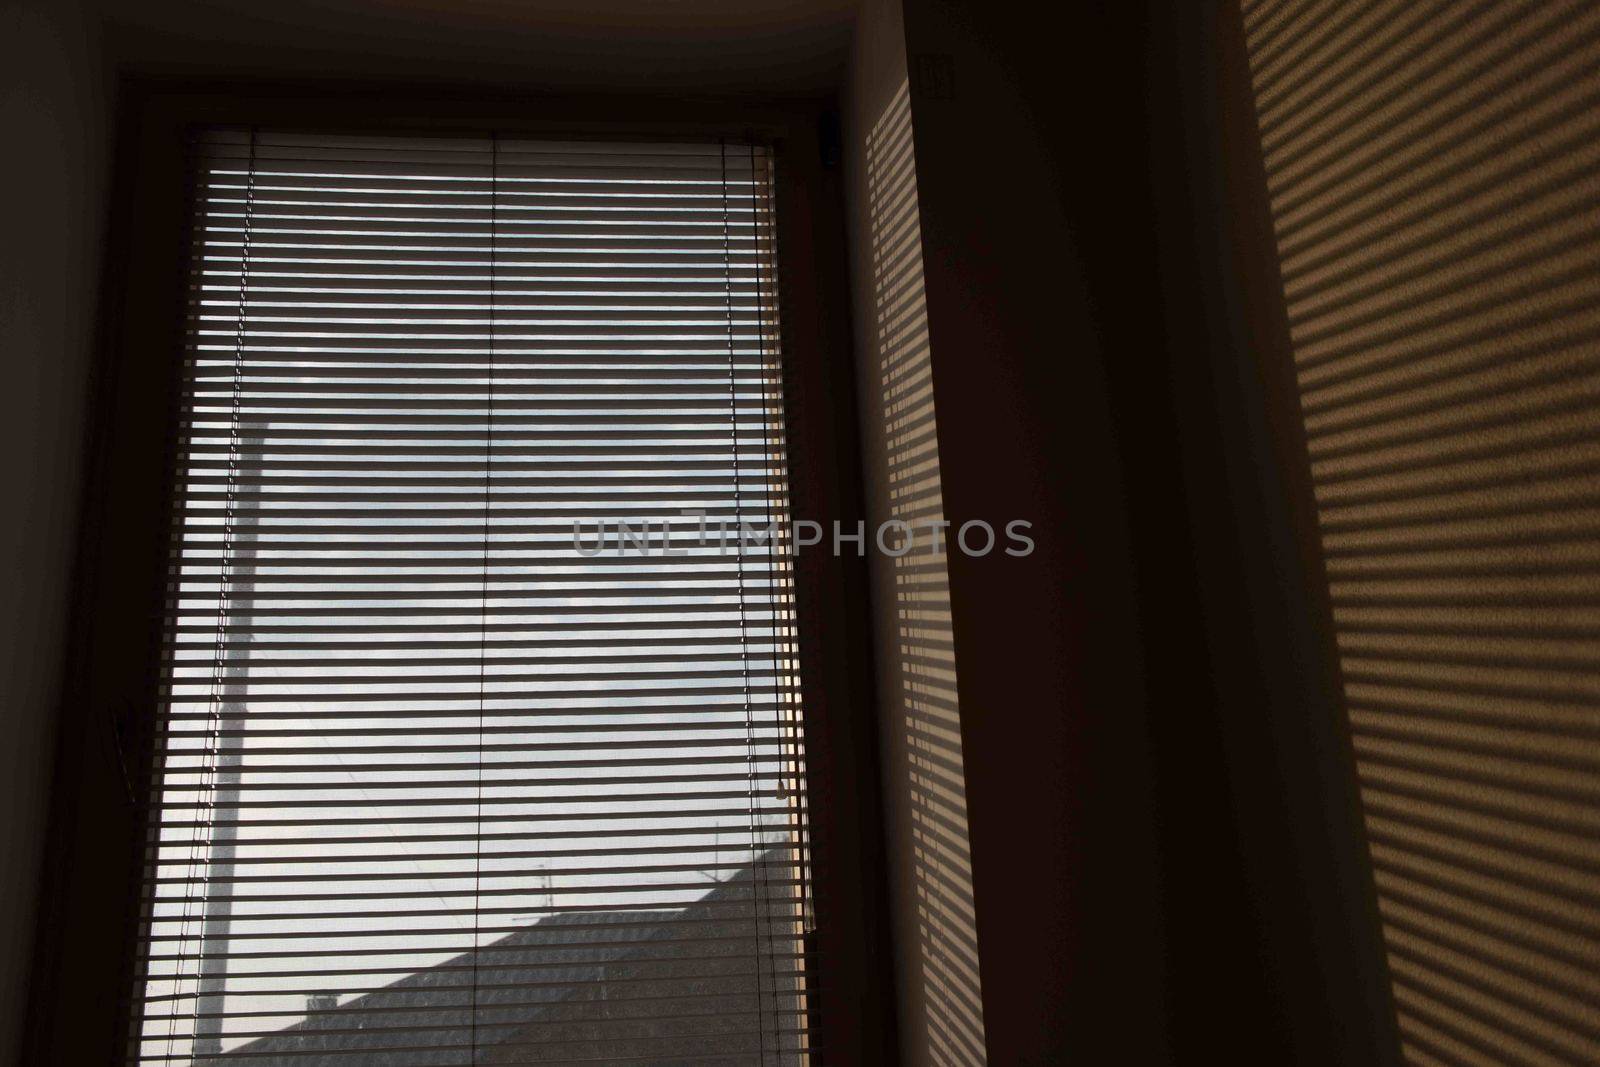 shade of venetian blind on the wall, subject shadow on the wall, shadow wallpaper, shadow. Light falls on a subject and creates shadows on the wallpaper in the room.